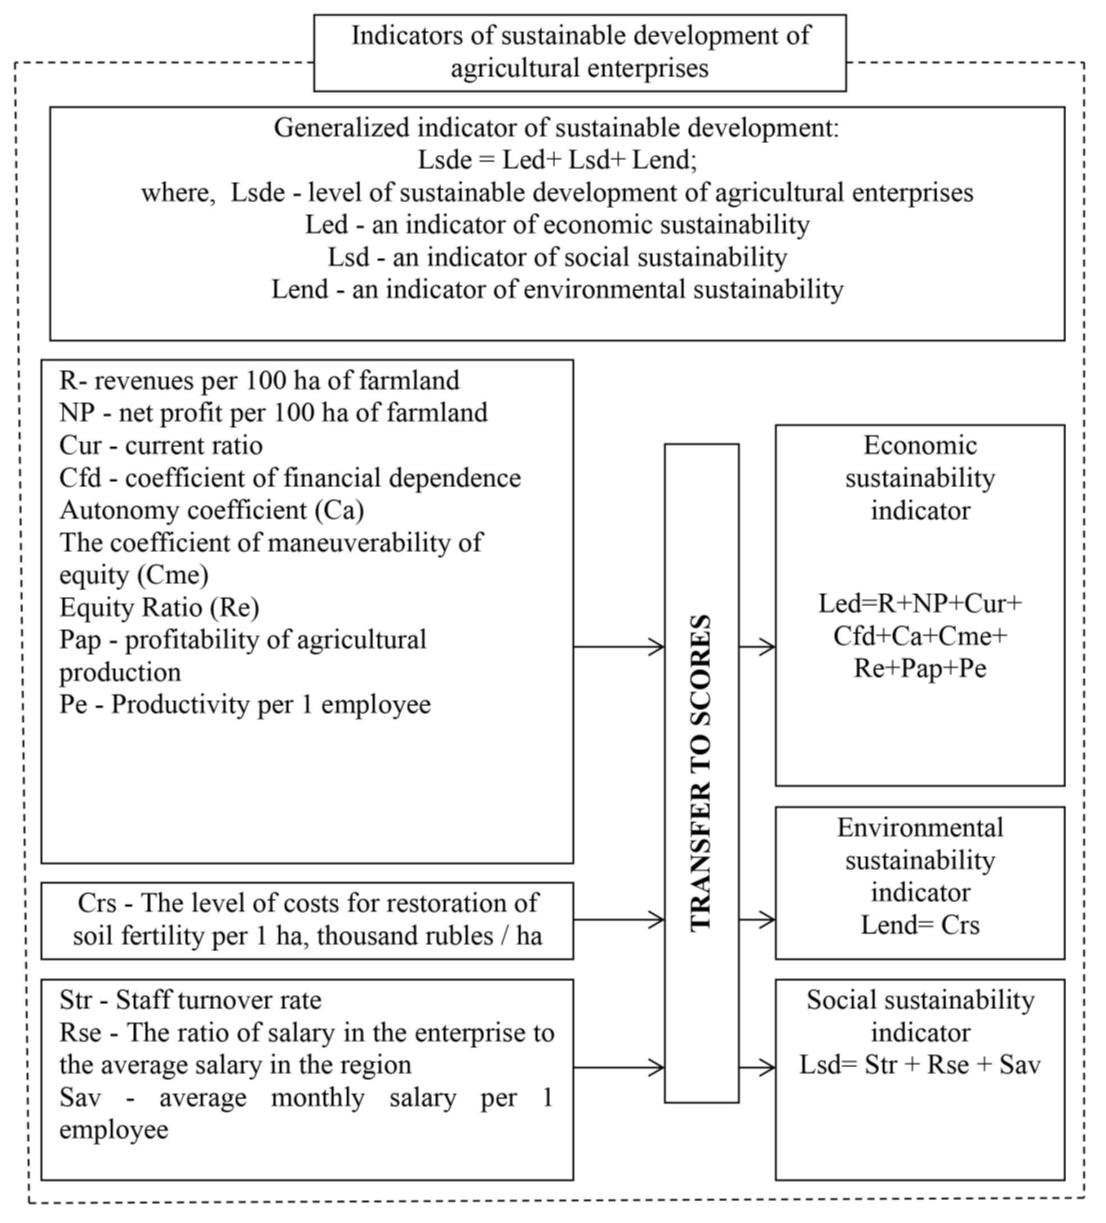 The system of indicators for sustainable development of agricultural enterprises.png